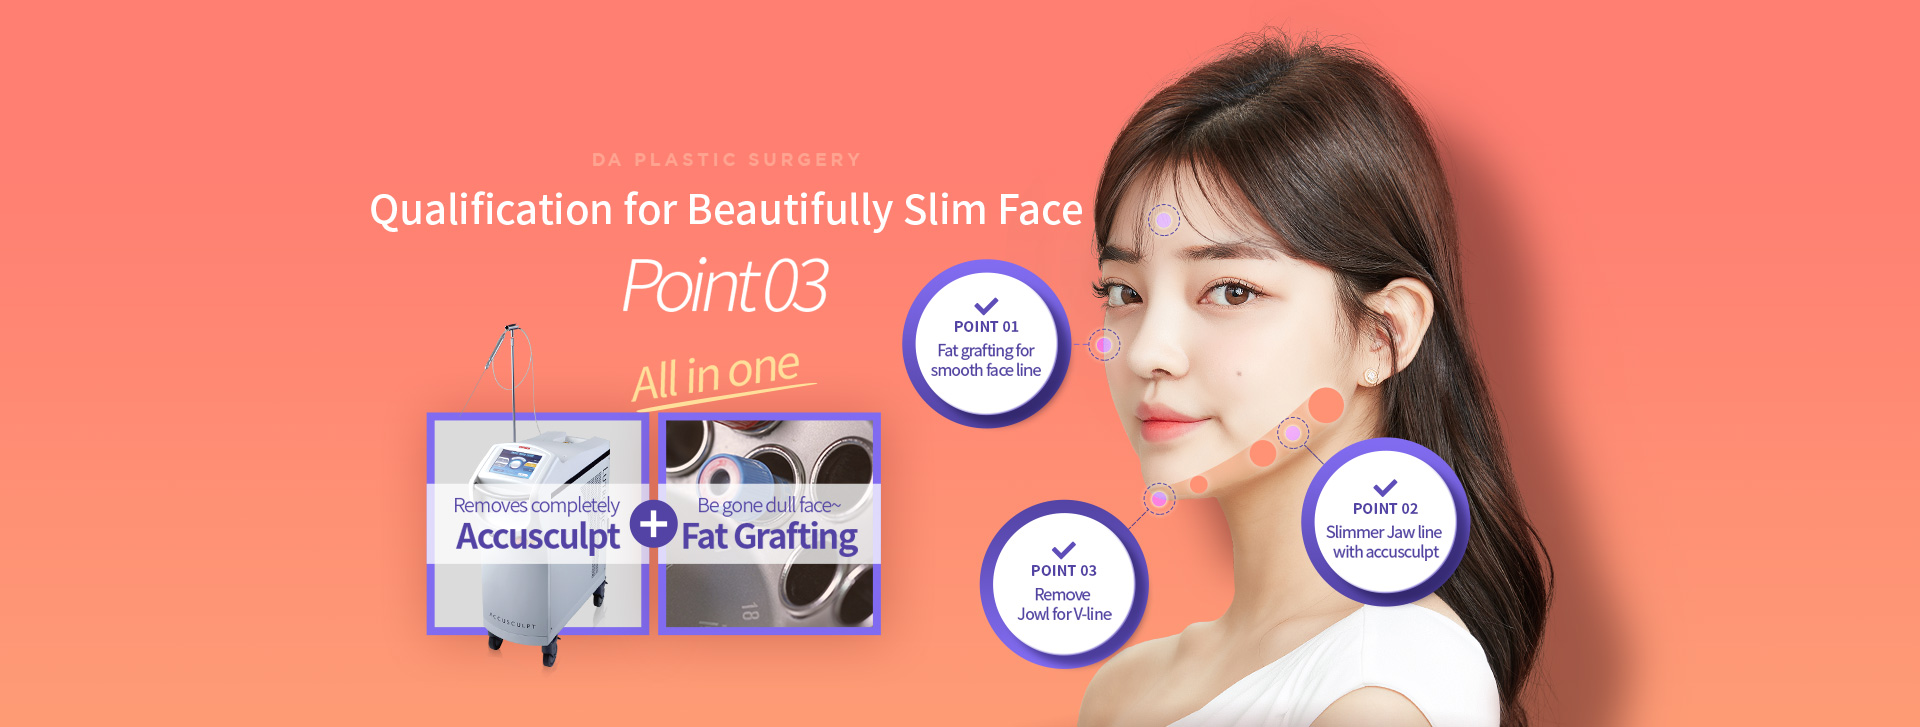 Qualification for Beautifully Slim Face